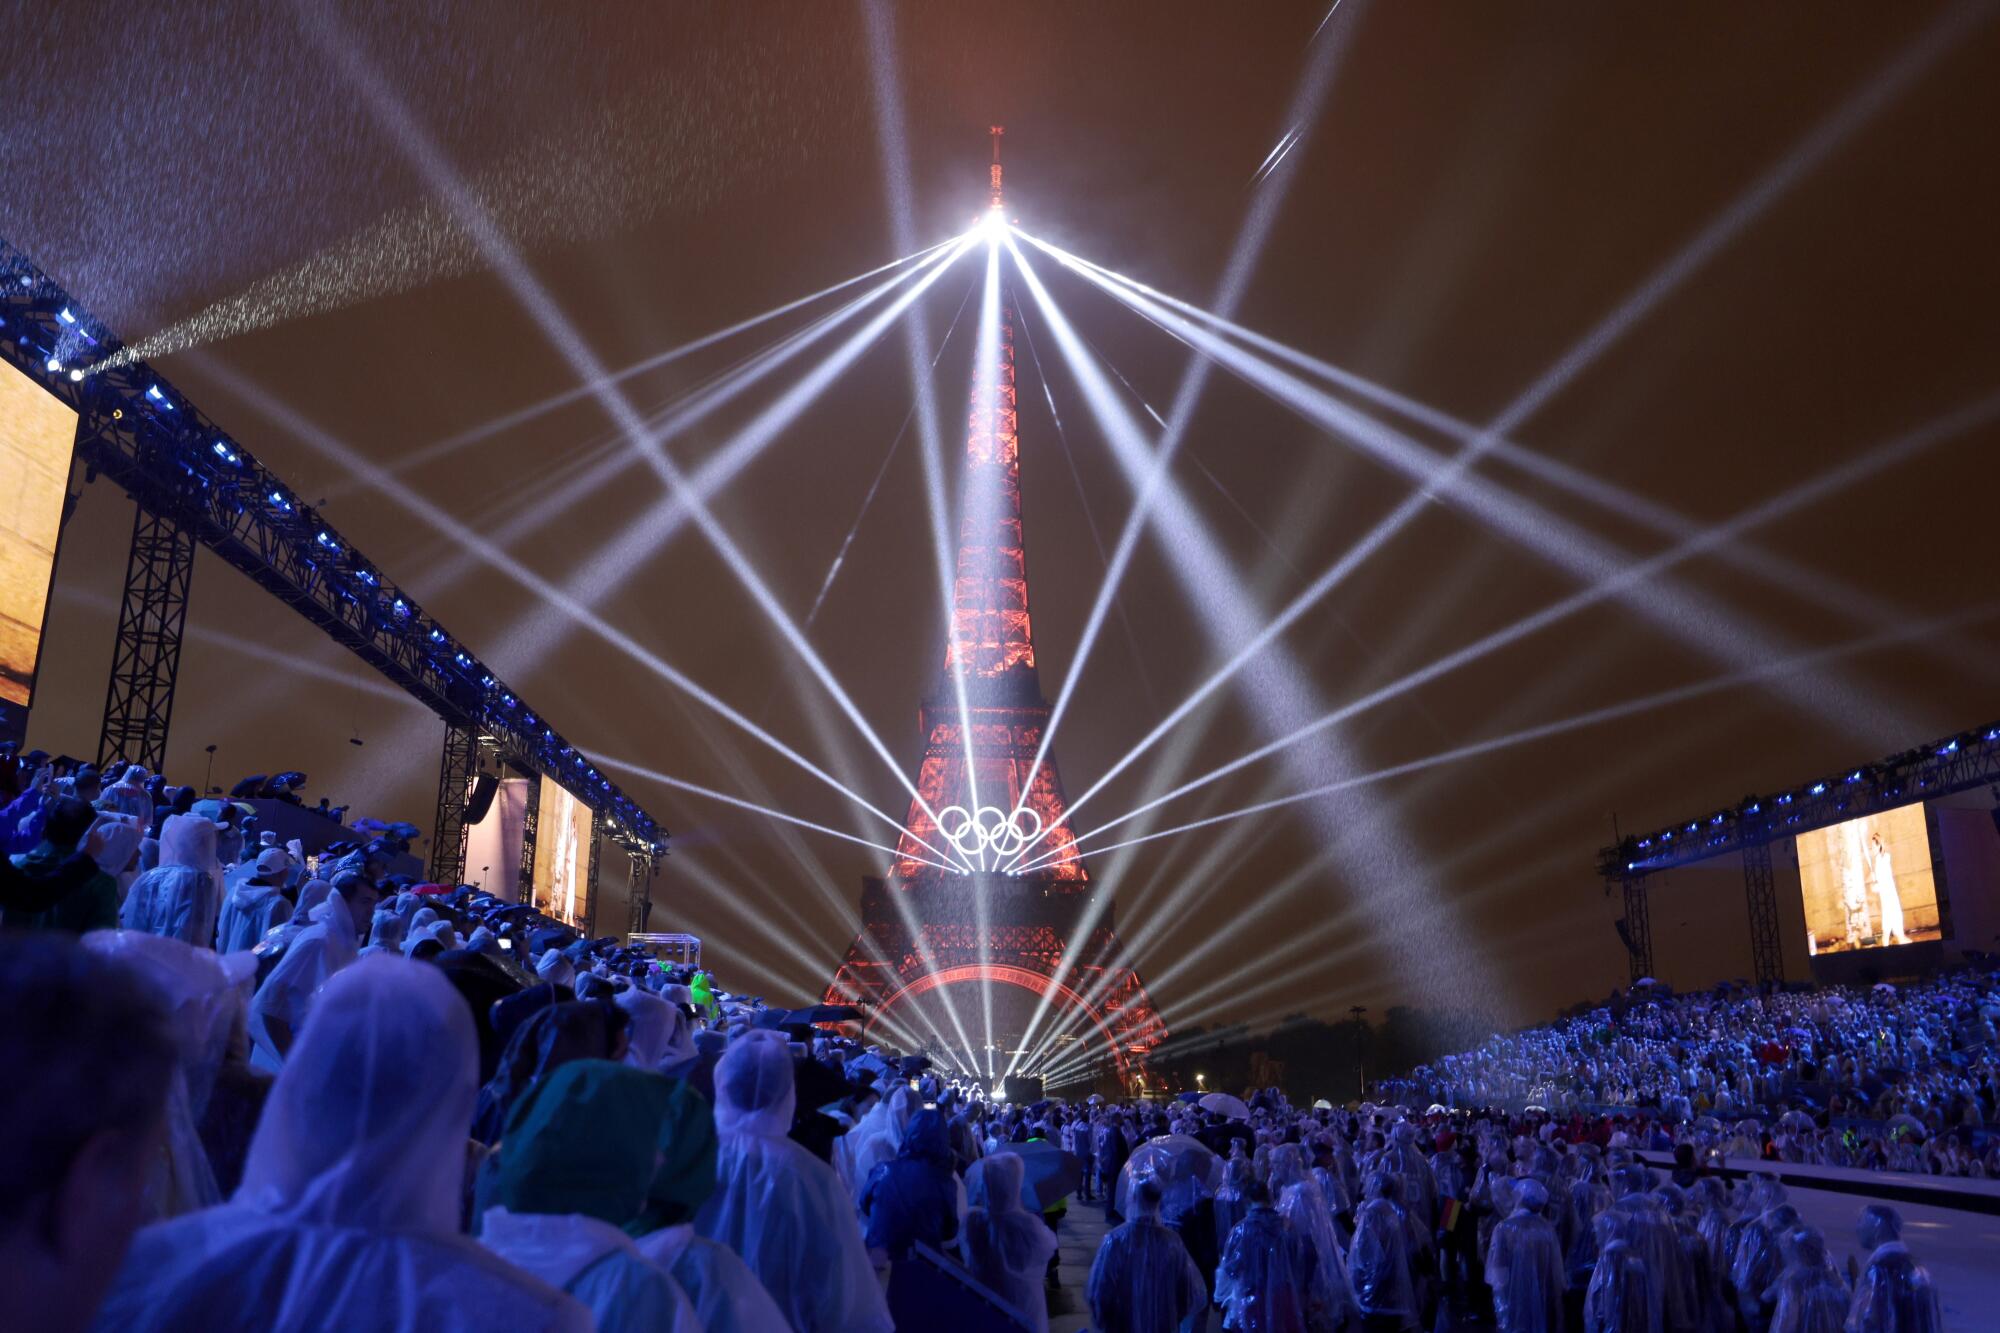 A light show is projected from the Eiffel Towe during the opening ceremony of the 2024 Summer Olympics.